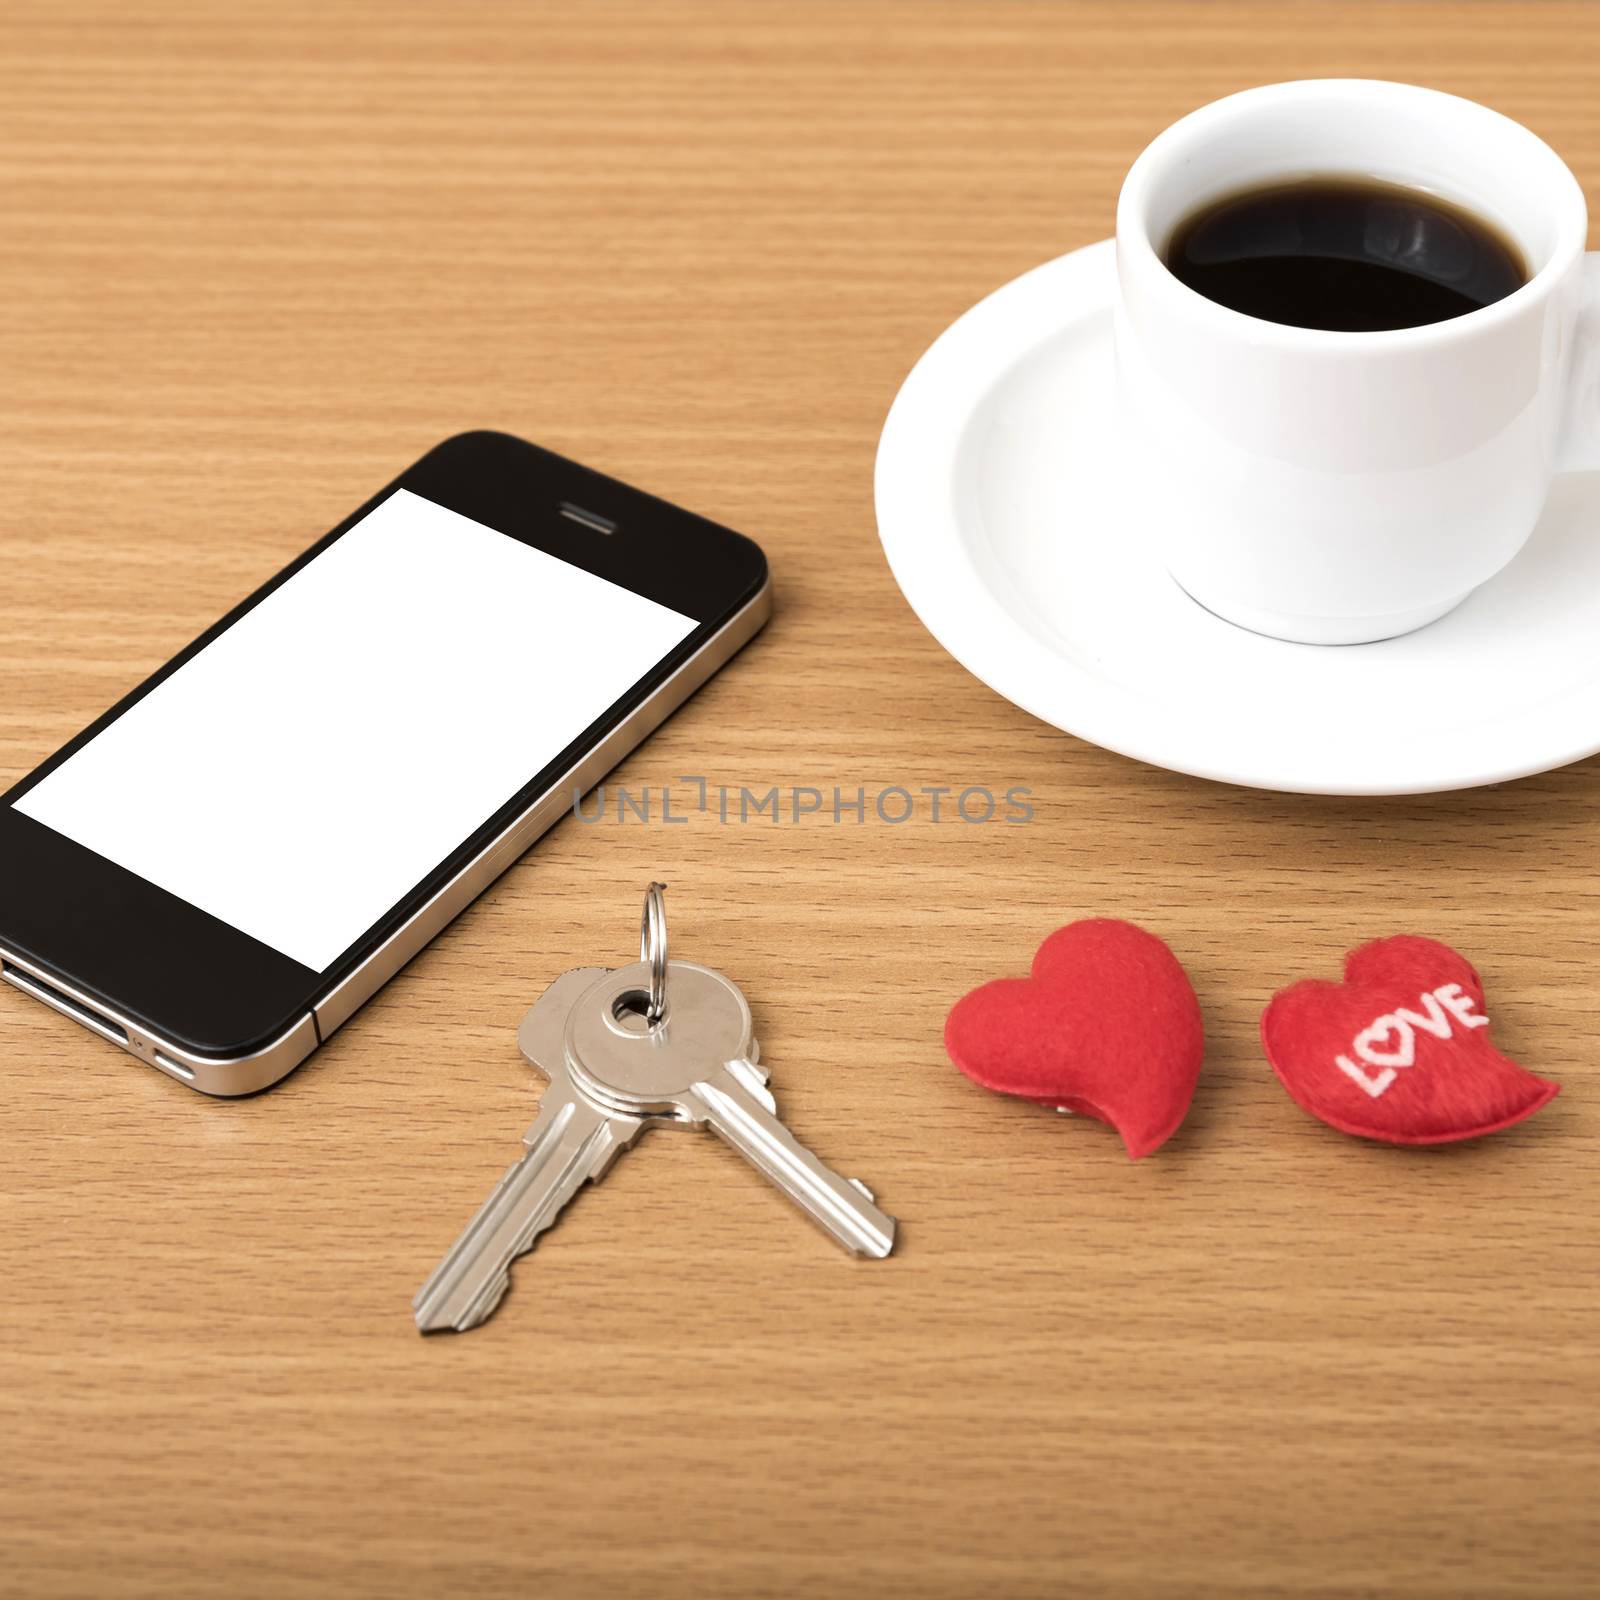 coffee phone key and heart on wood table background